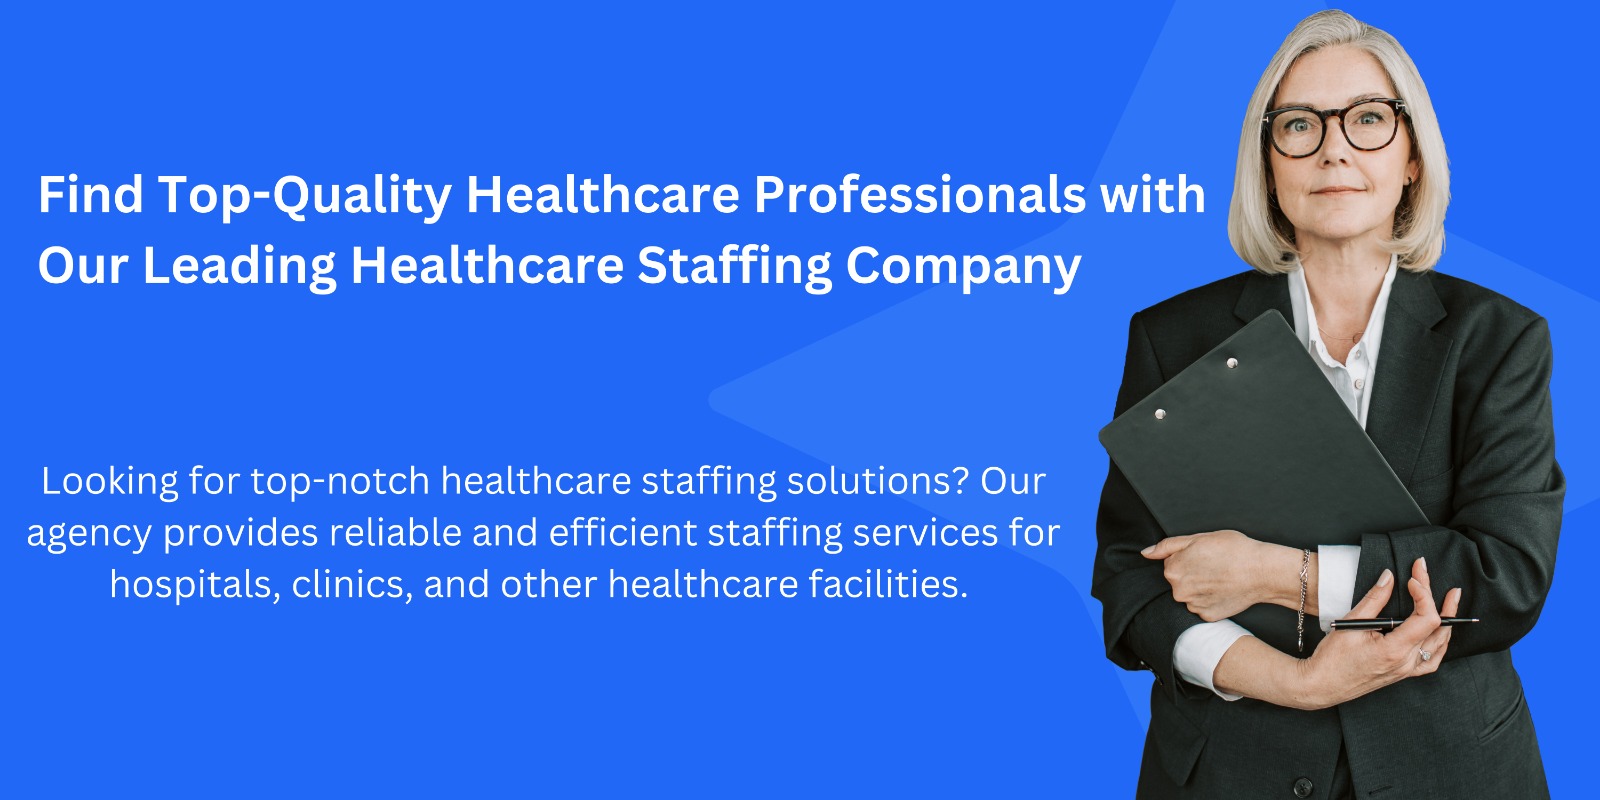 Health care staffing solutions